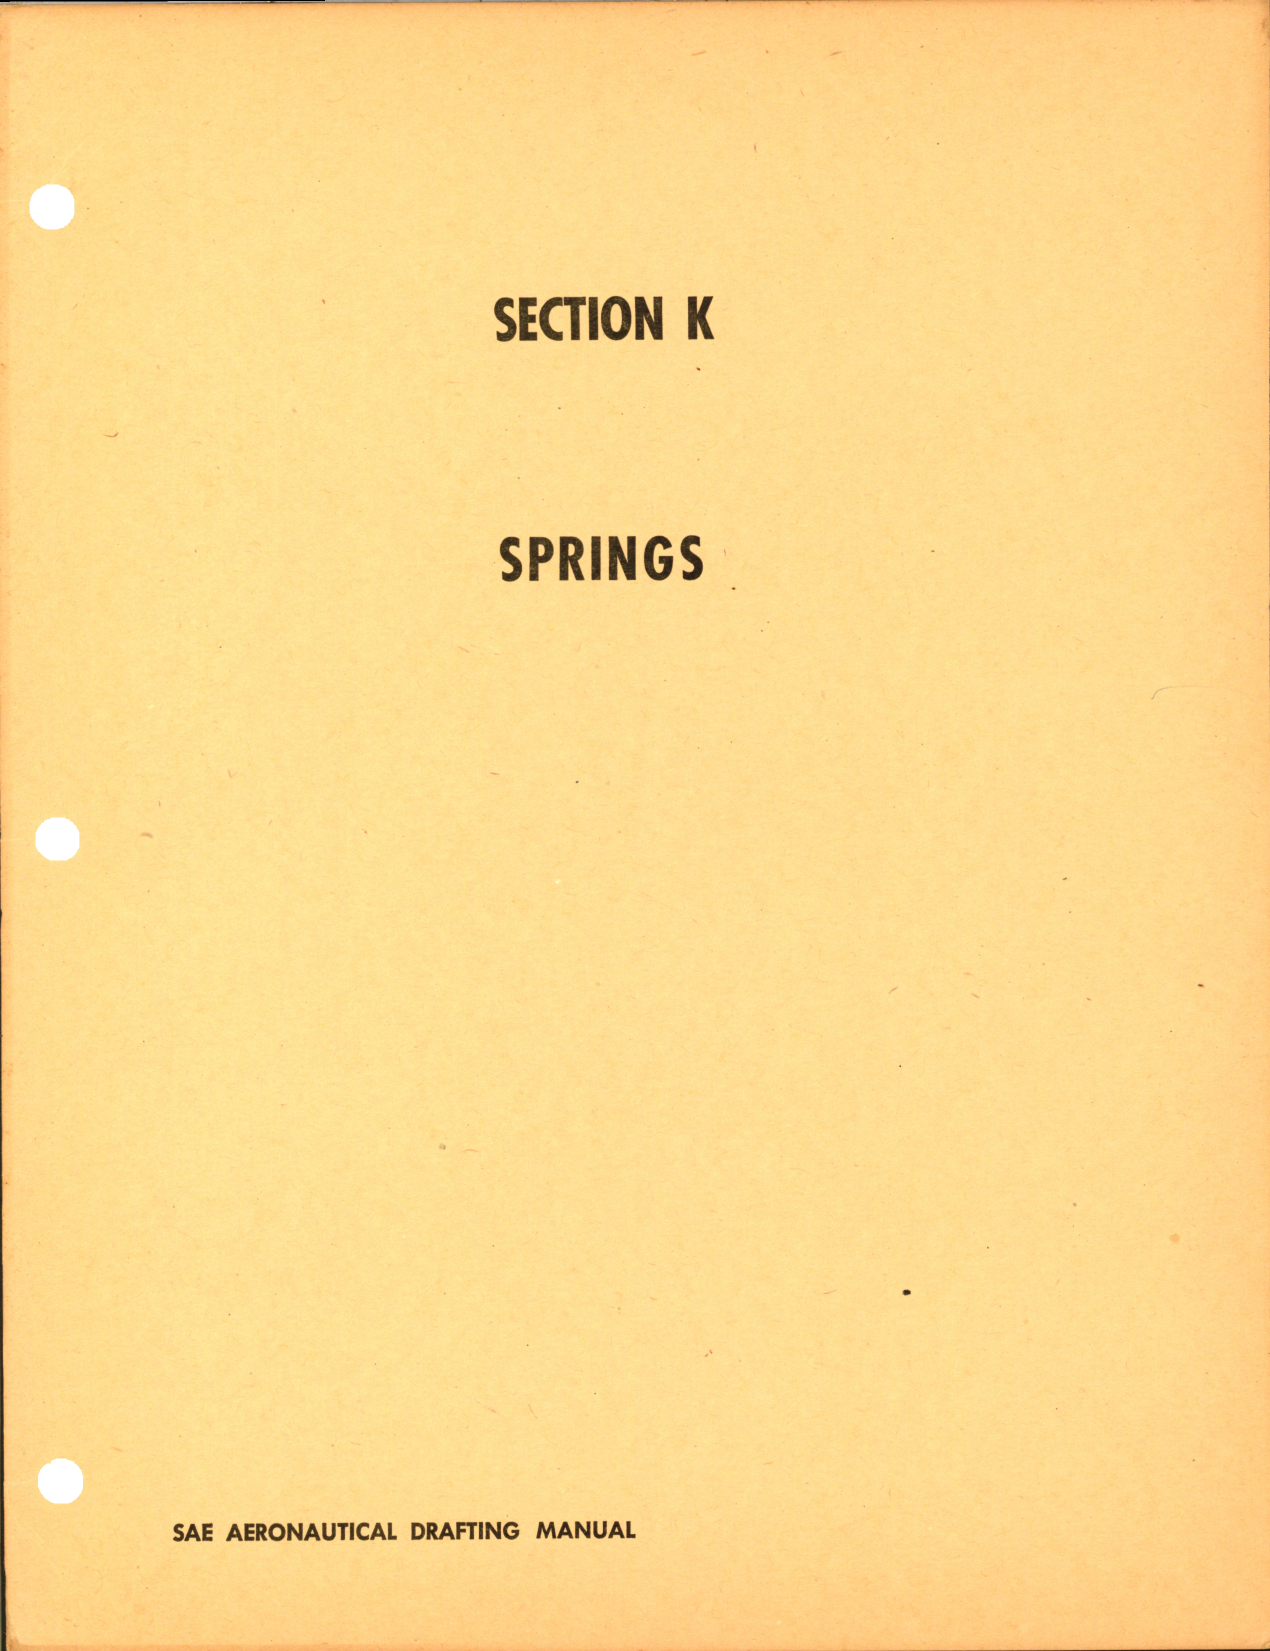 Sample page 7 from AirCorps Library document: Aeronautical Drafting Manual 